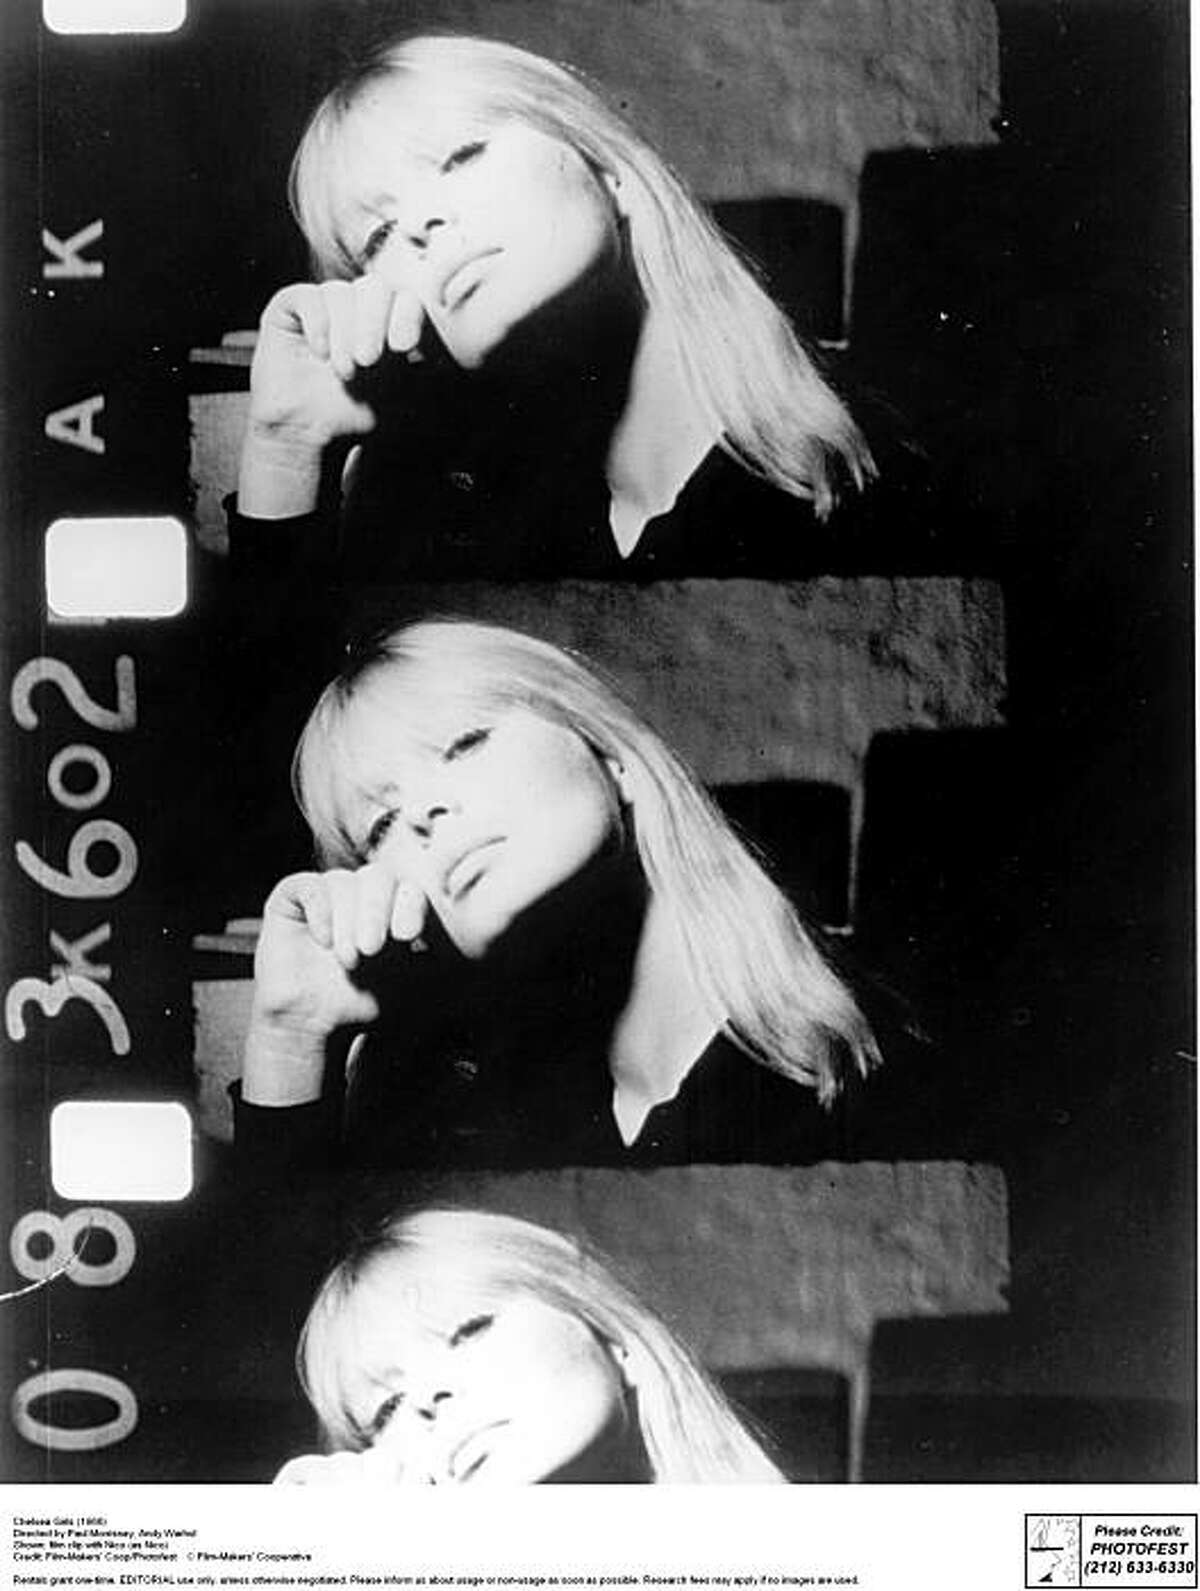 An image from "Chelsea Girls," the 1966 film by Andy Warhol and Paul Morrssey, featuring Nico.